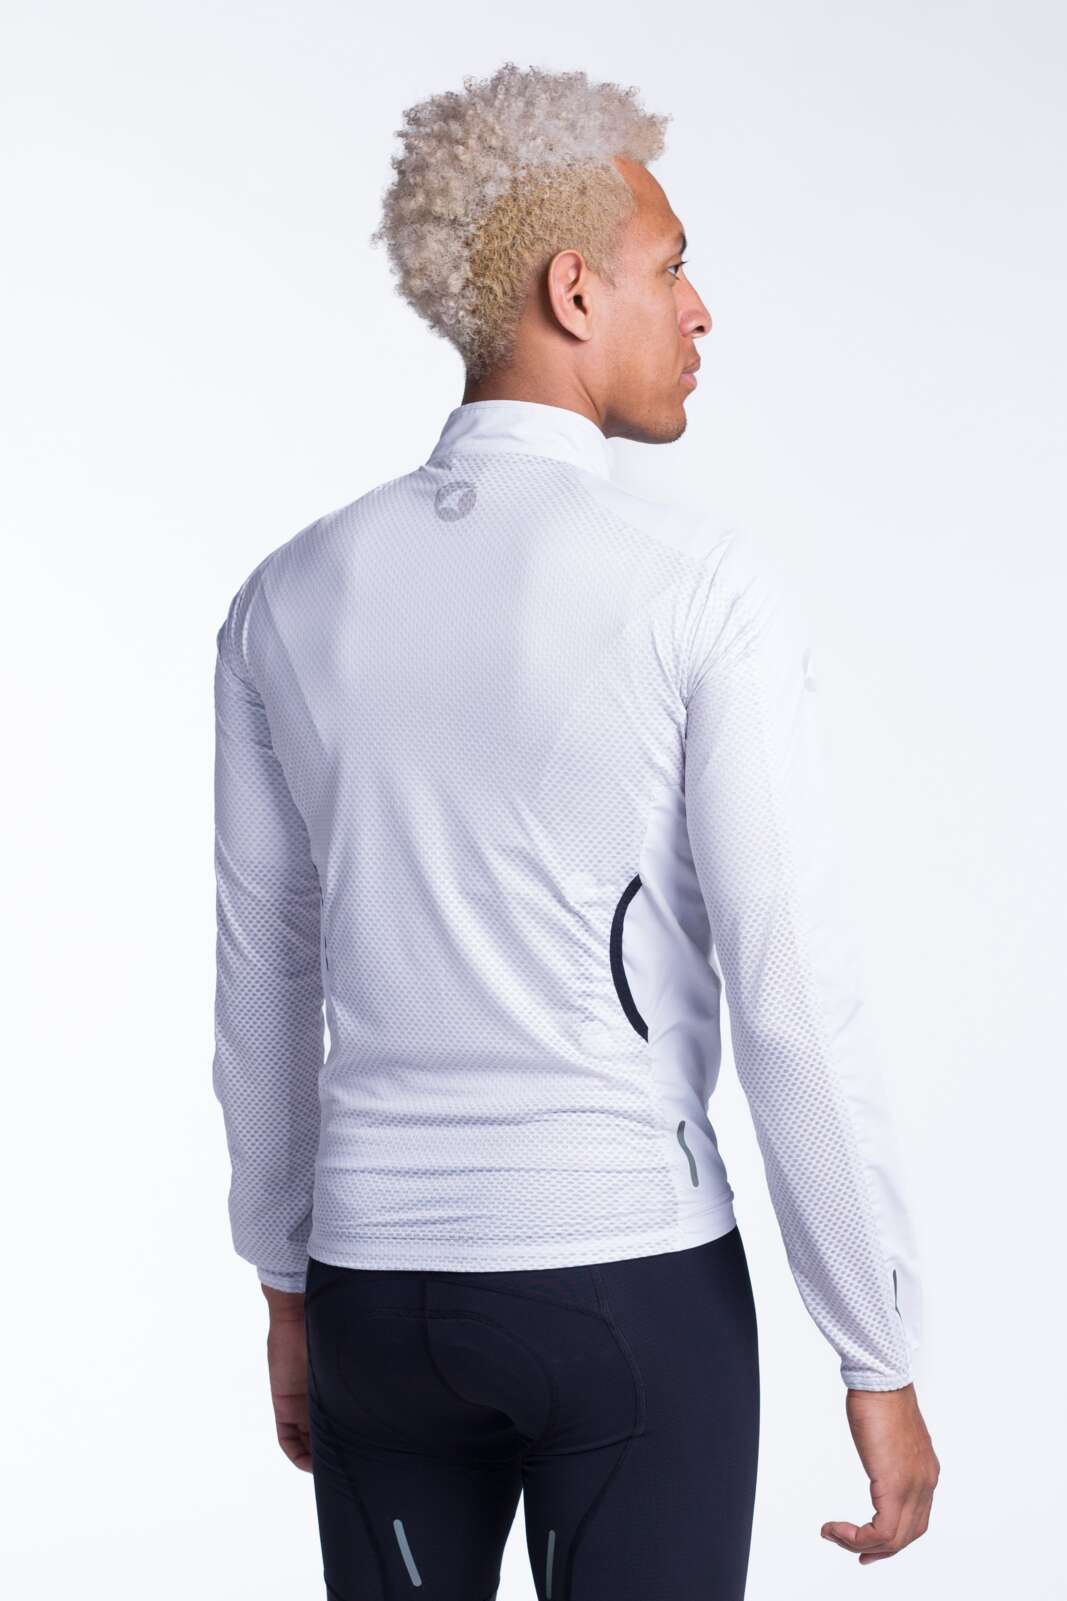 Men's White Packable Cycling Wind Jacket  - Back View